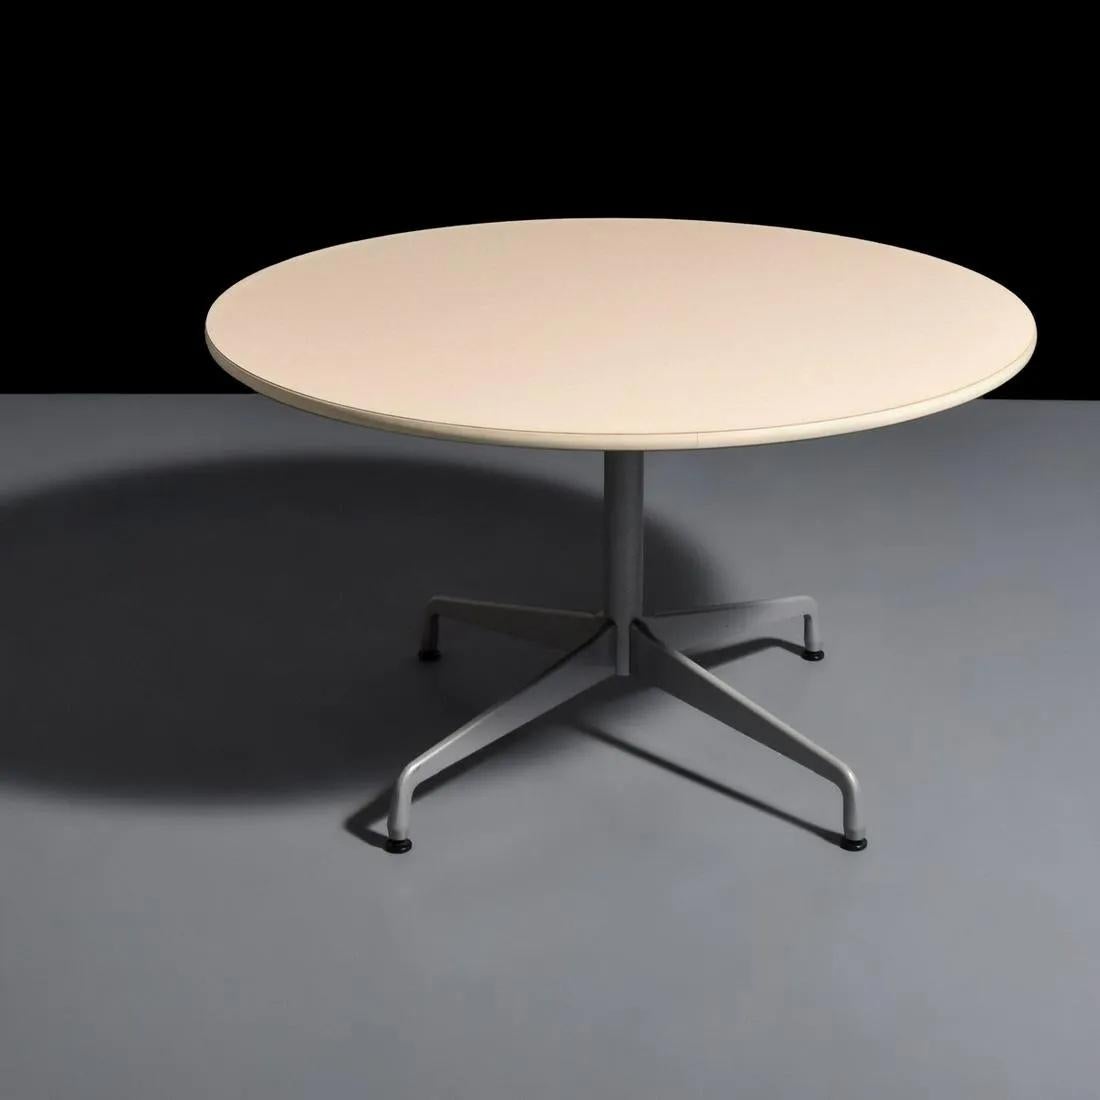 A timeless round dining or conference table designed by Ray and Charles Eames for Herman Miller. The table features a laminate top in white with light grey grain design standing on steel base. The base can be detached from the top and is nicely